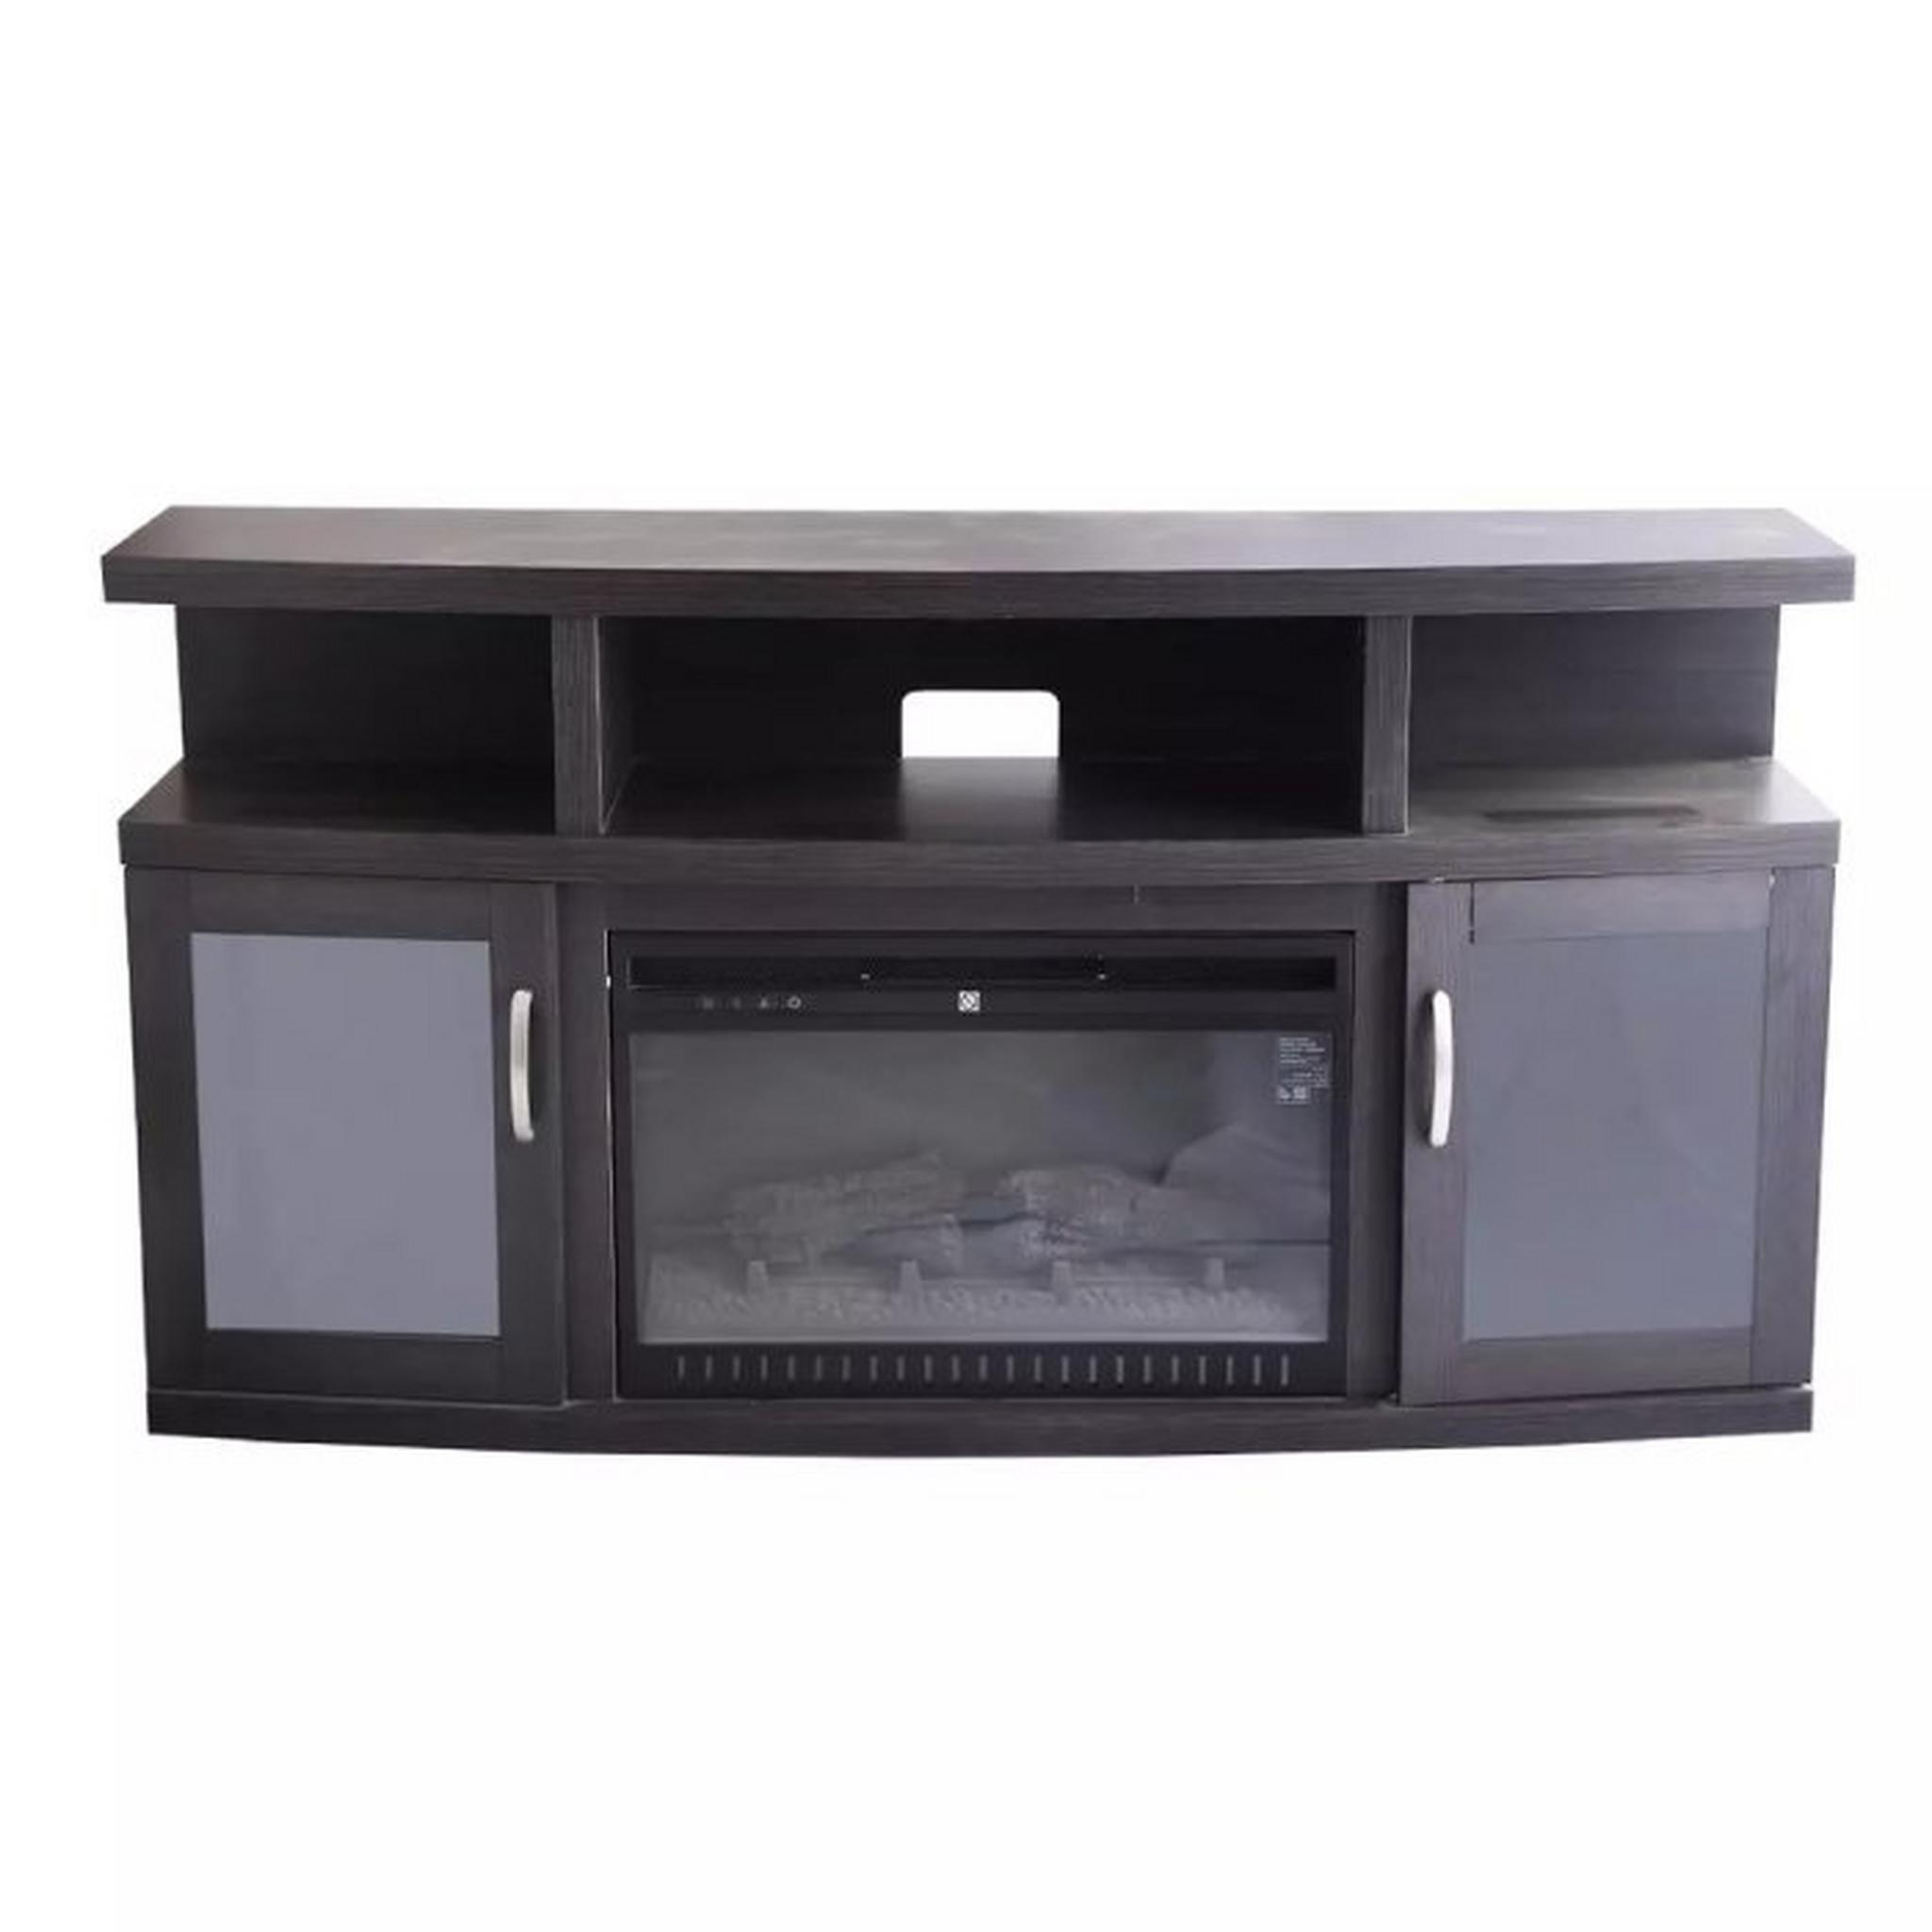 Wansa Upto 65-inch TV Stand with Fireplace Insert (WSM065F66) + Fireplace insert for TV Stand (SF122-26A)